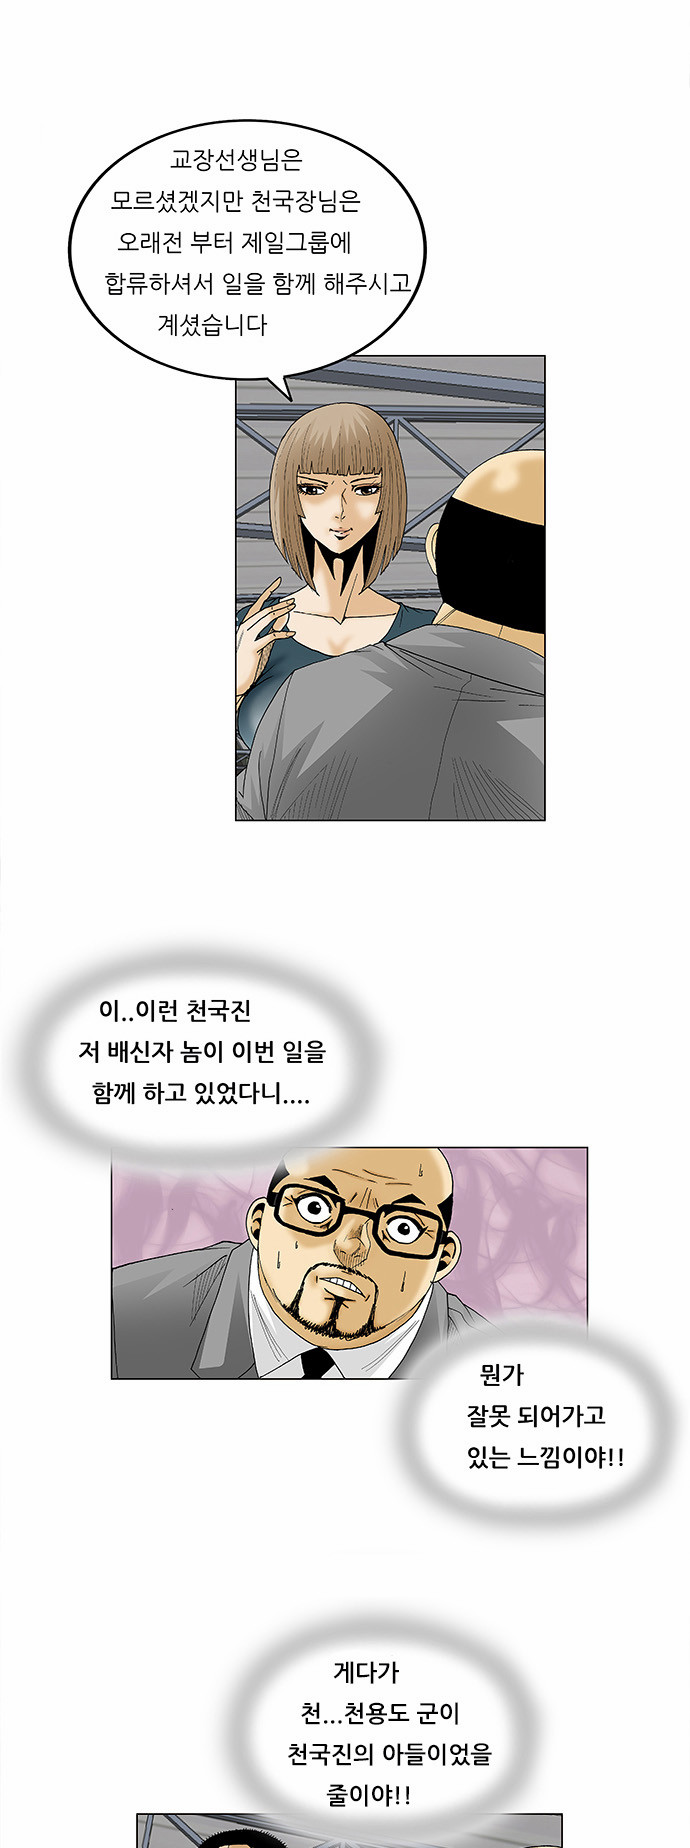 Ultimate Legend - Kang Hae Hyo - Chapter 79 - Page 3